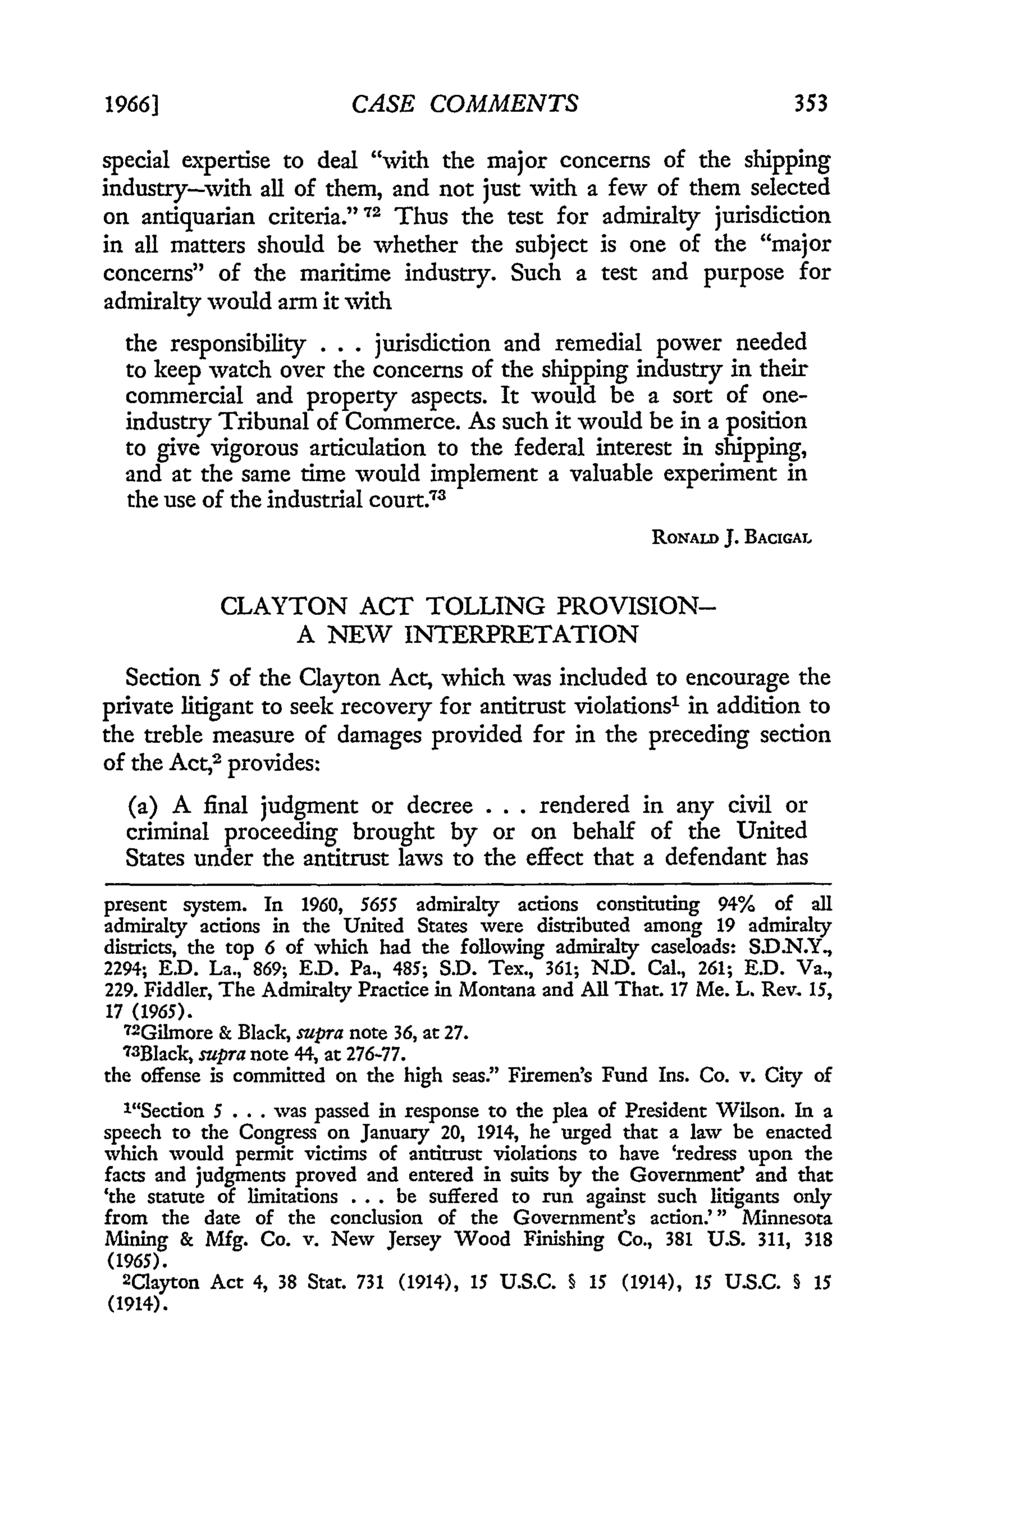 1966] CASE COMMENTS special expertise to deal "with the major concerns of the shipping industry-with all of them, and not just with a few of them selected on antiquarian criteria.